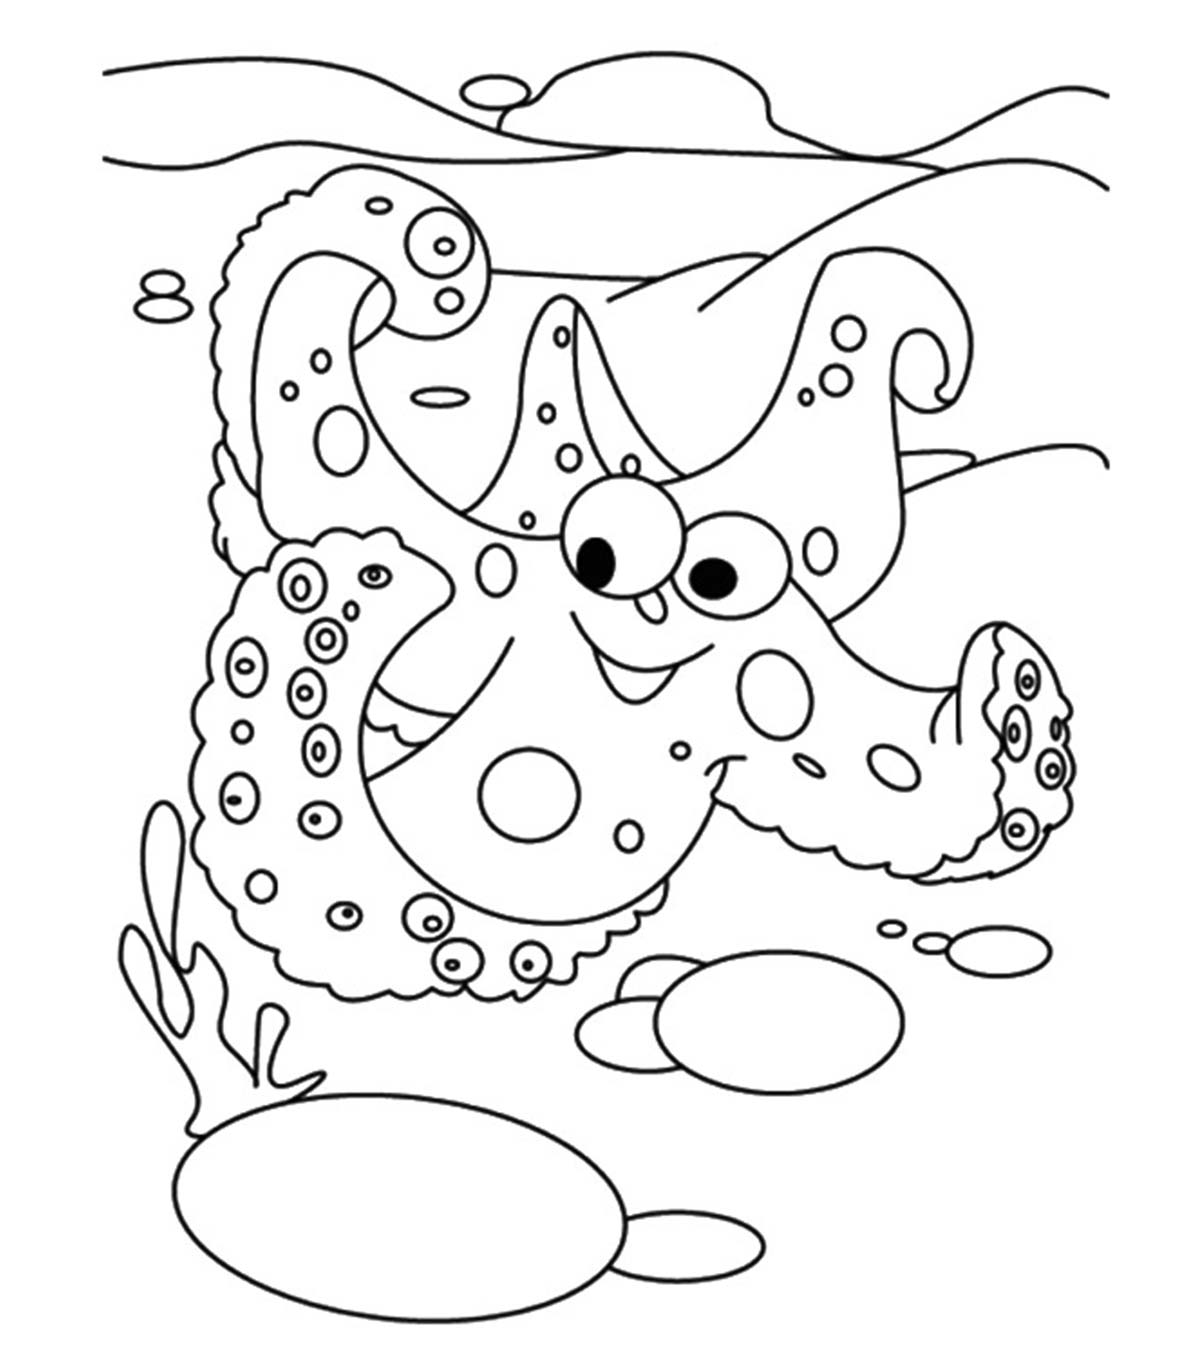 Top 10 Starfish Coloring Pages For Your Little Ones_image